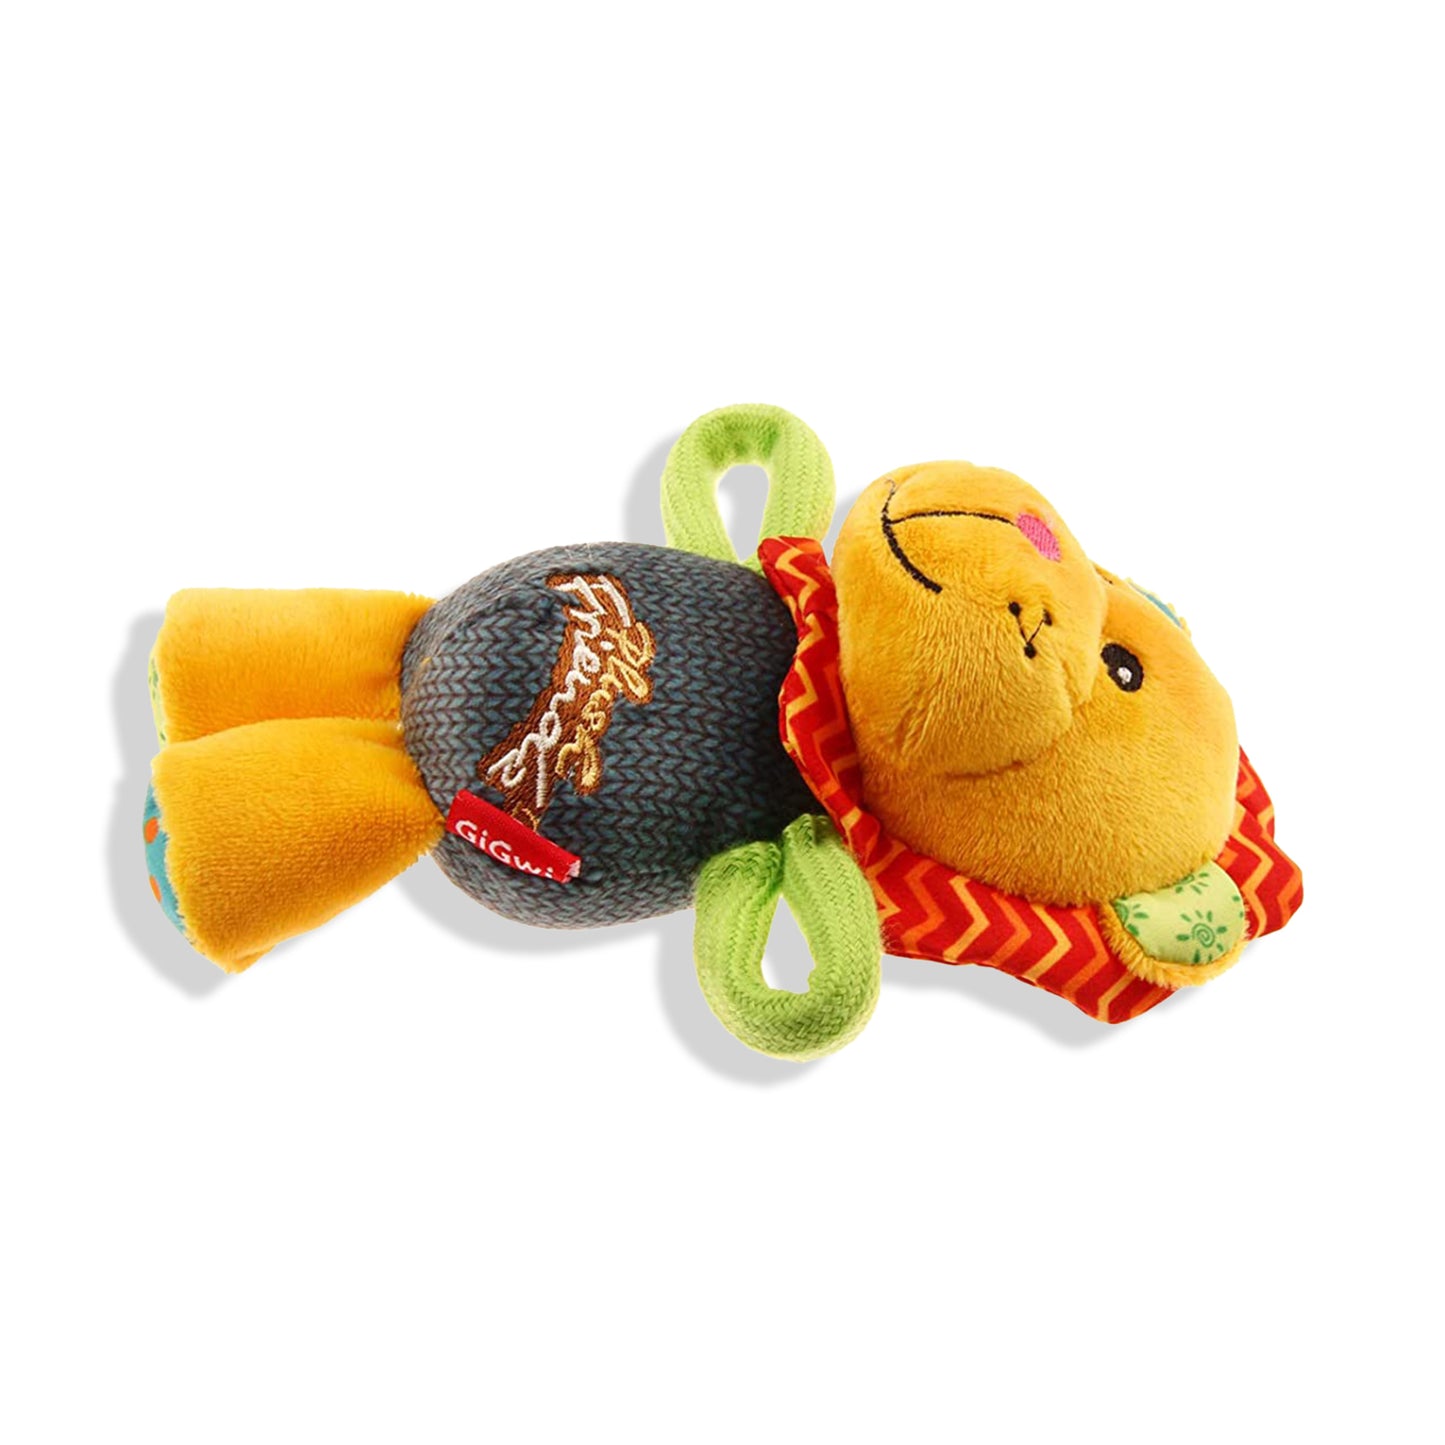 GiGwi Plush Friendz Dog Toy - Lion (with Squeaker) - Heads Up For Tails